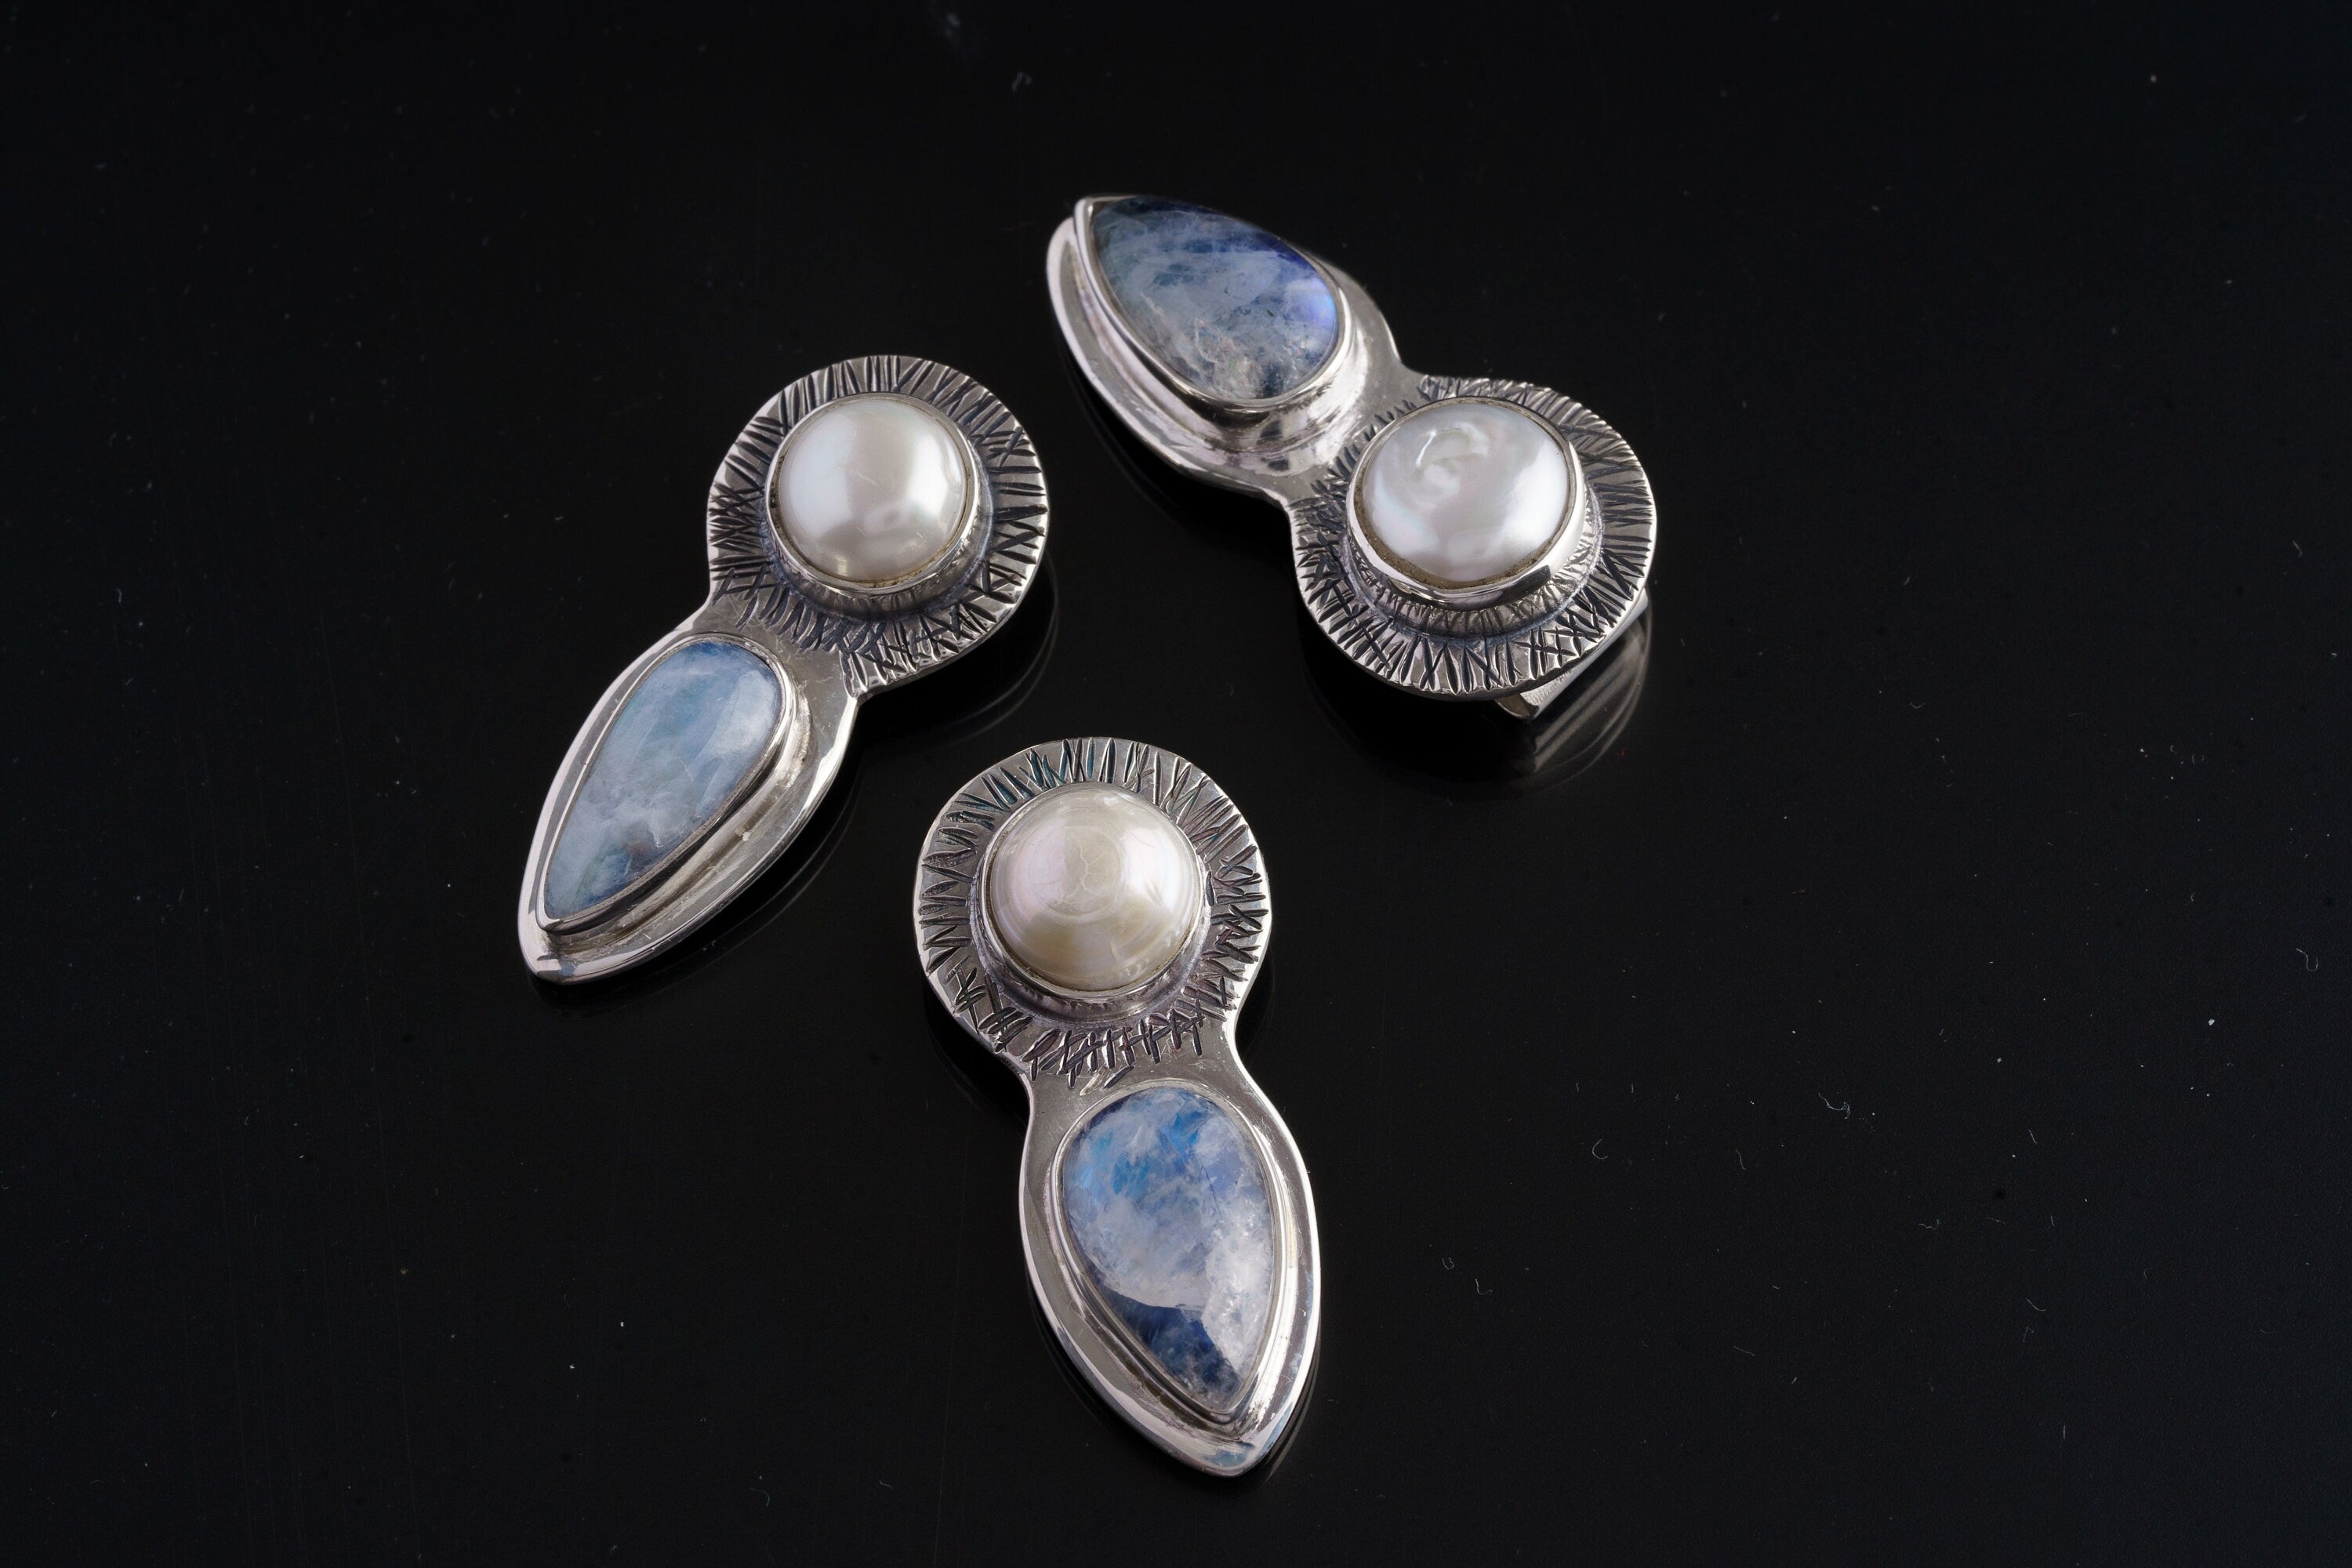 Elegant Venus Figurine Pendant with Blue Moonstone and South Sea Pearl - Stack Pendant - Textured 925 Sterling Silver